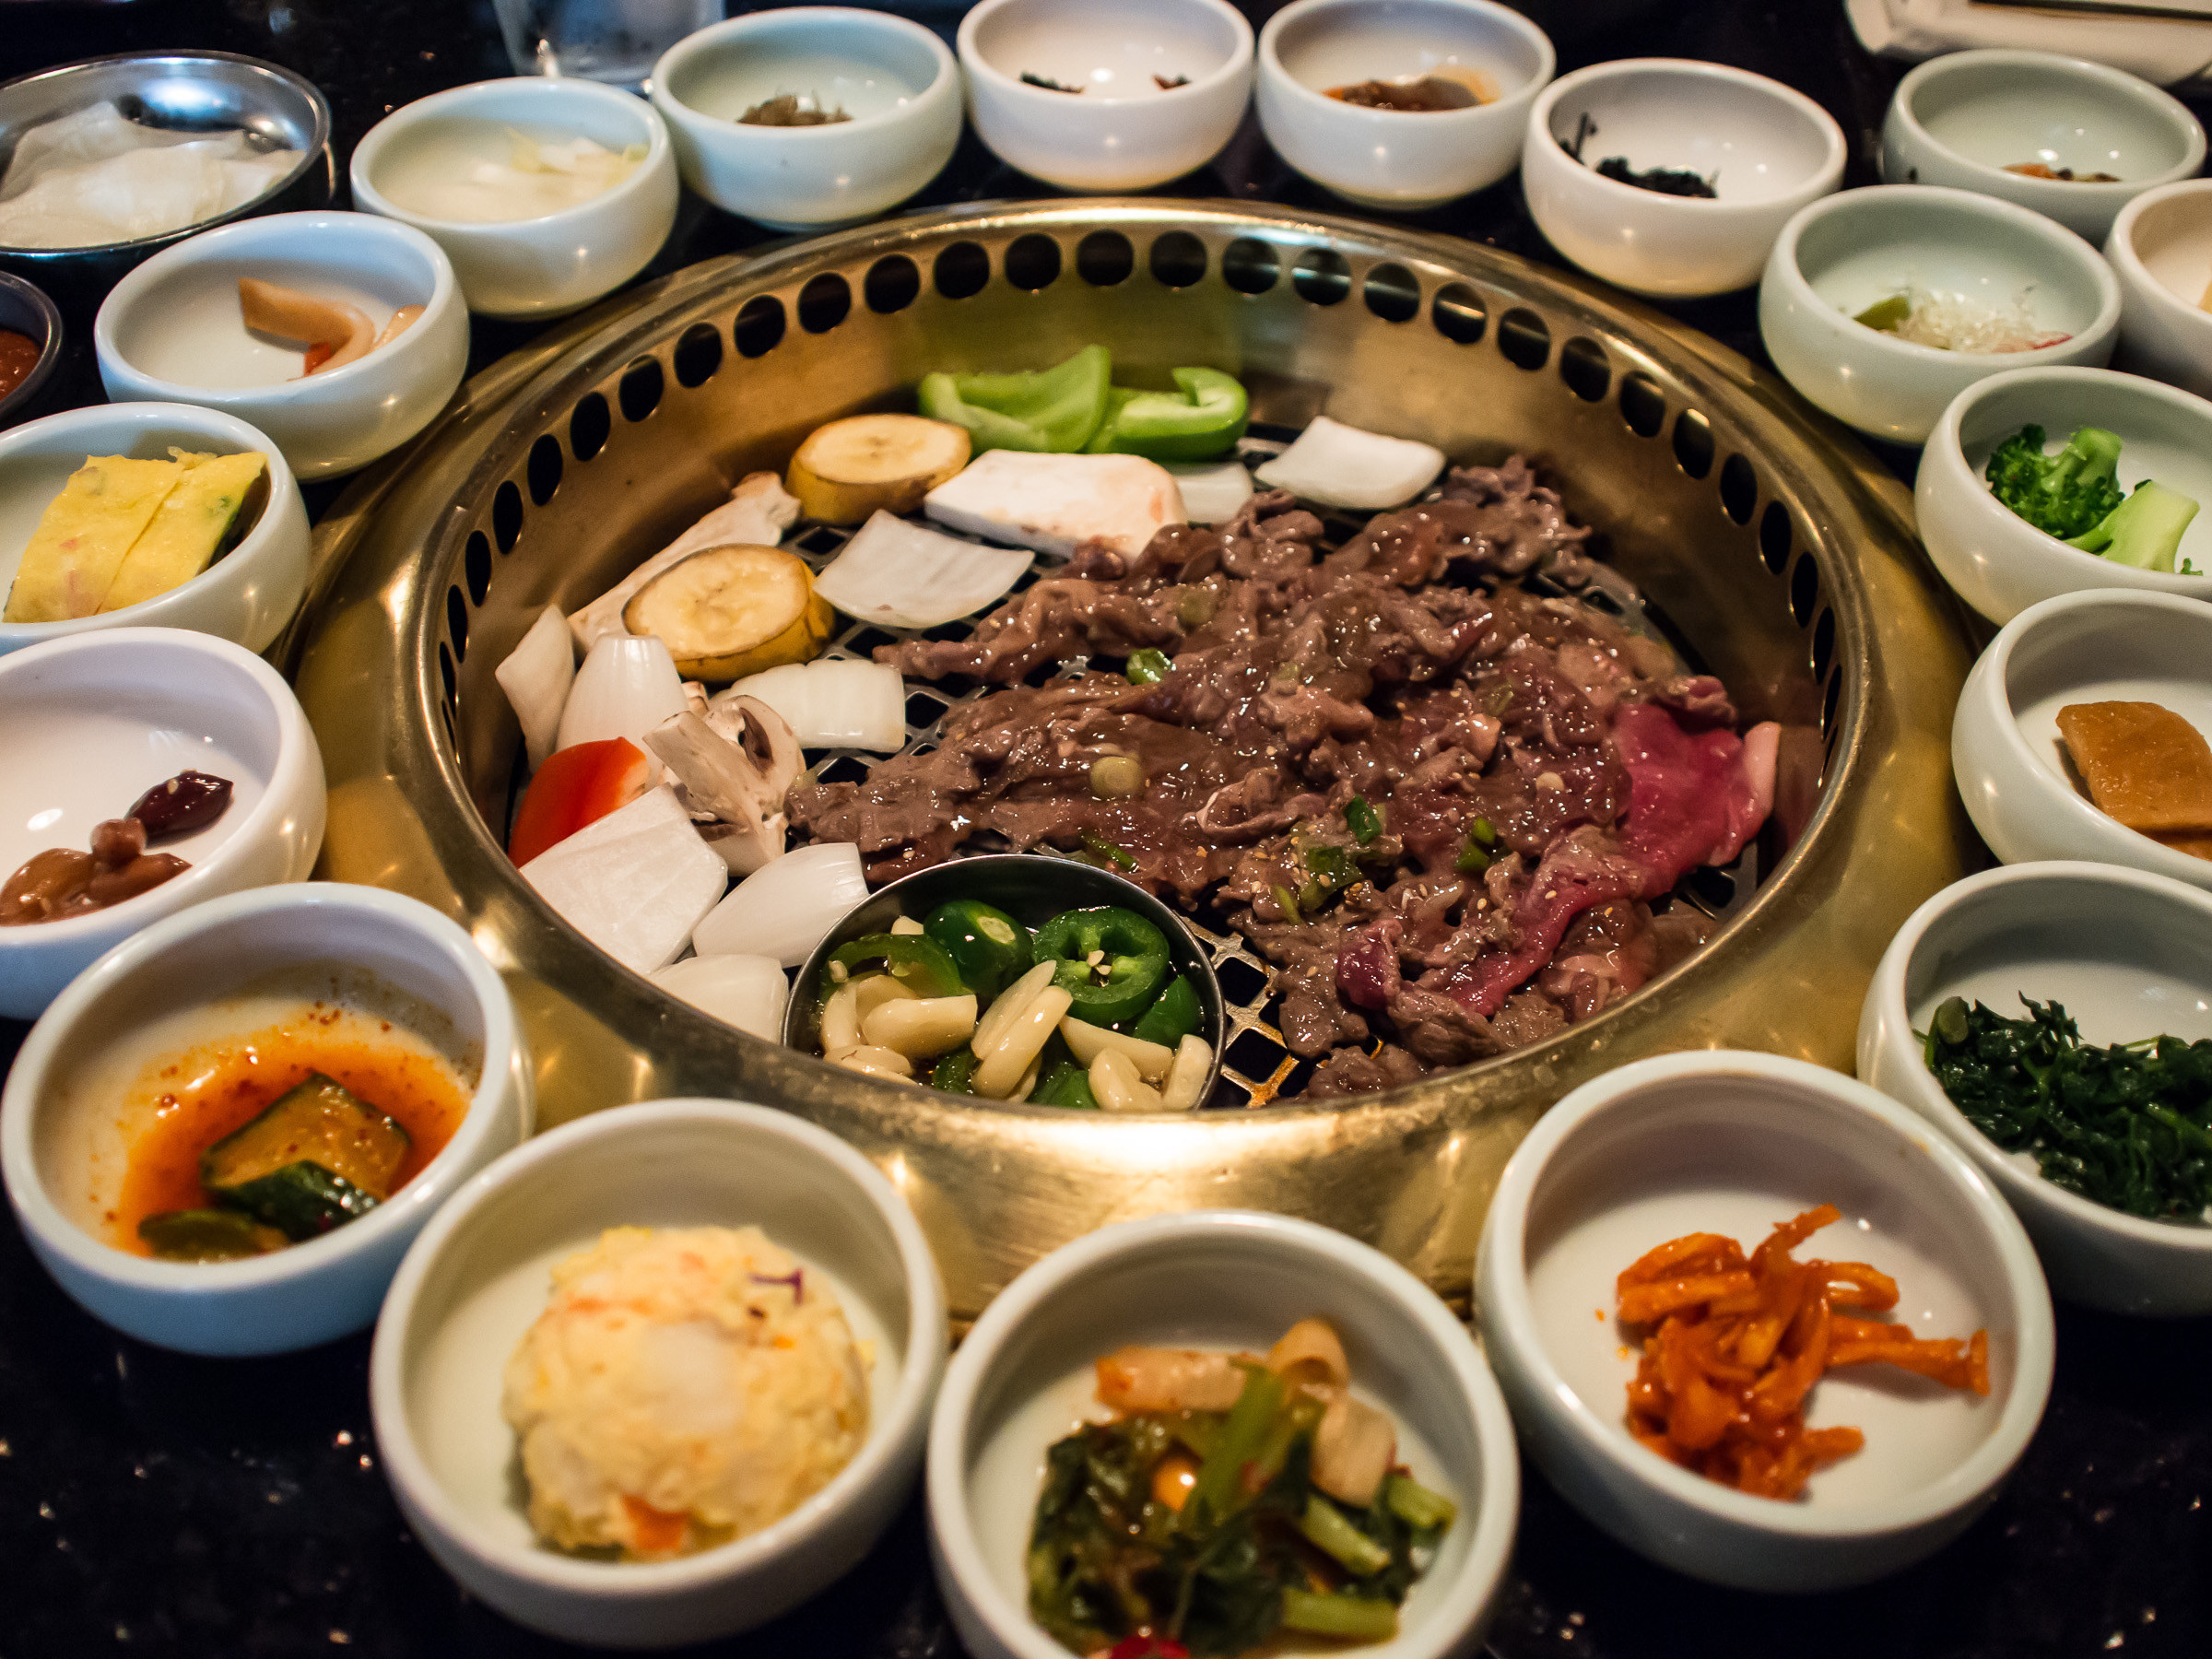 Korean barbecue with lots of banchan side dishes